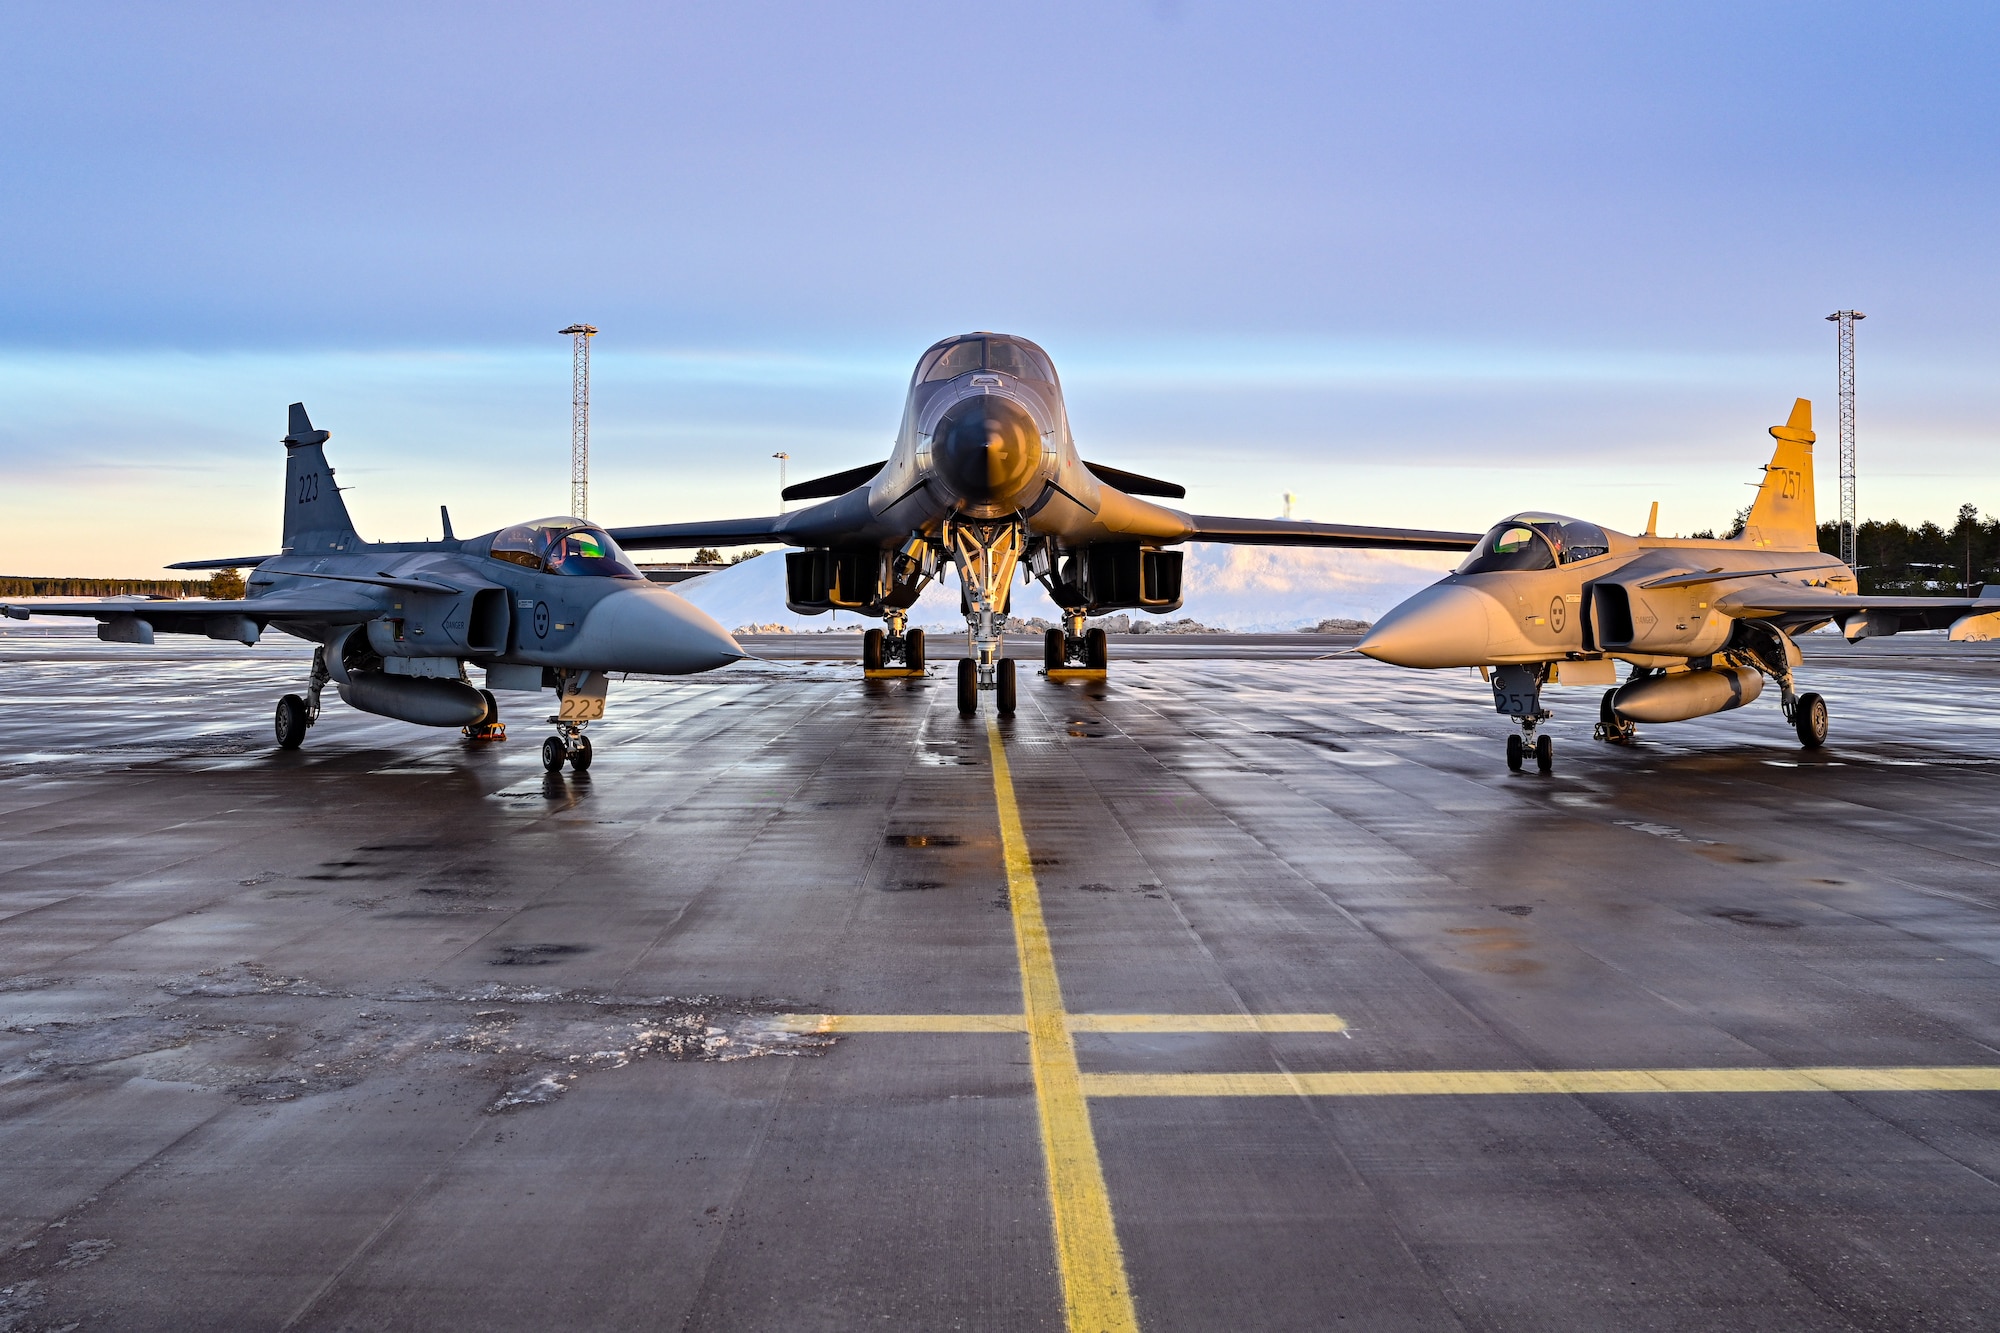 A U.S. Air Force B-1B Lancer assigned to the 28th Bomb Wing, Ellsworth Air Force Base, South Dakota, sits on a landing pad alongside two Saab JAS 39 Gripens at Luleå-Kallax Air Base, Sweden, Feb. 26, 2024, during Bomber Task Force 24-2. BTF missions enable crews to maintain a high state of readiness proficiency, and validate an always-ready, global strike capability. BTF operations provide U.S. leaders with strategic options to assure Allies and partners, while deterring potential adversary aggression across the globe. (U.S. Air Force photo by Staff Sgt. Jake Jacobsen)